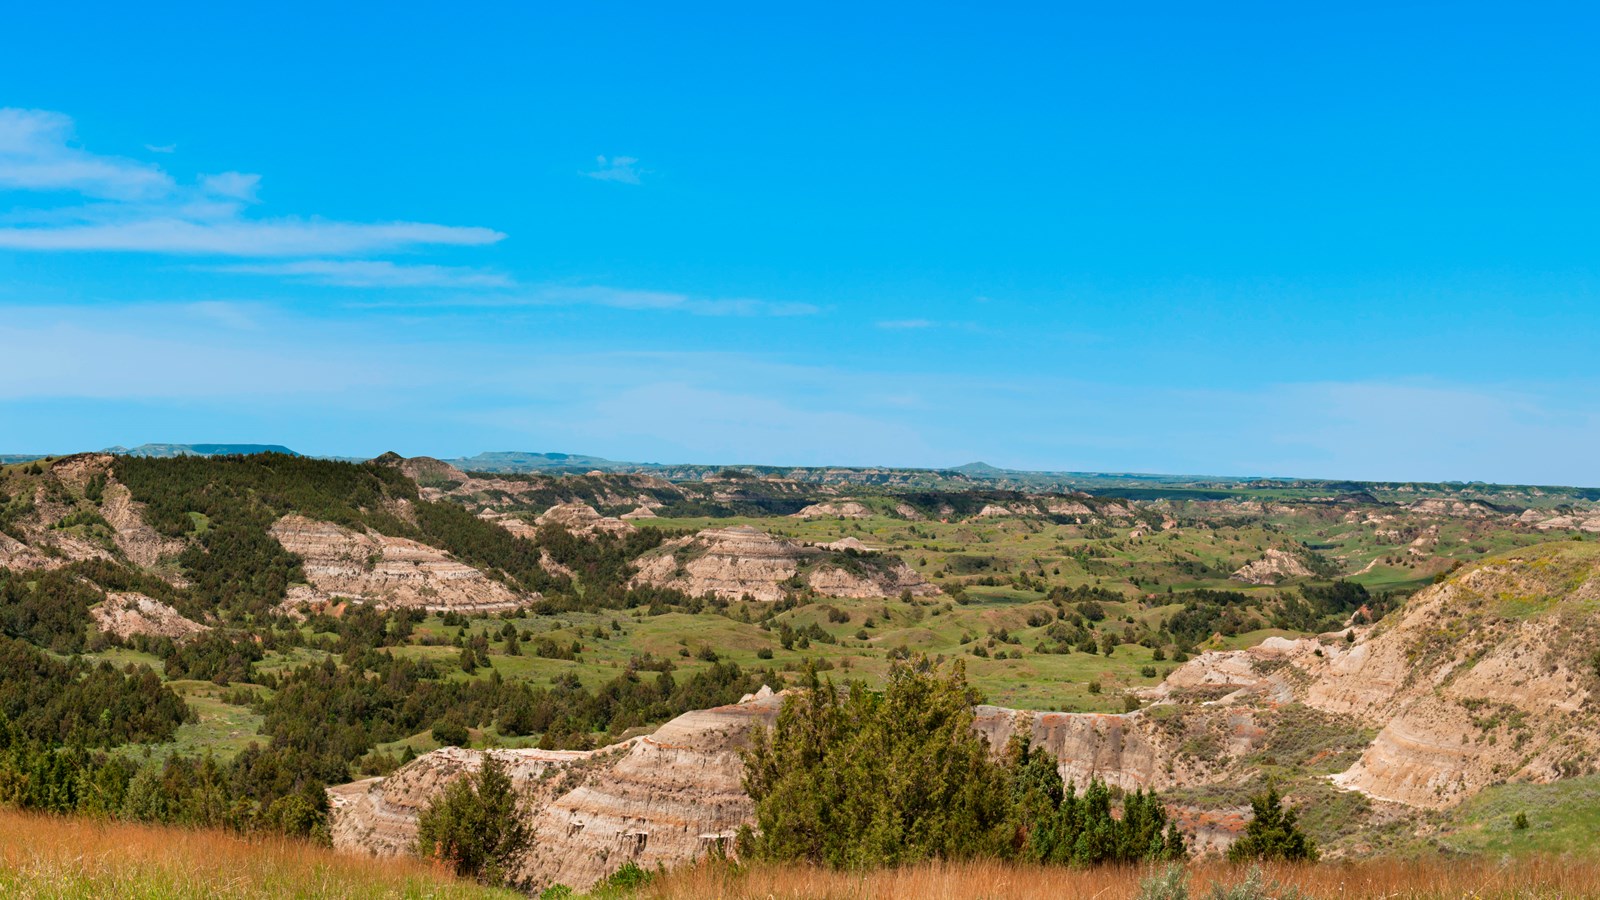 A view across the badlands, with buttes visible on the horizon, and trees and valleys below.